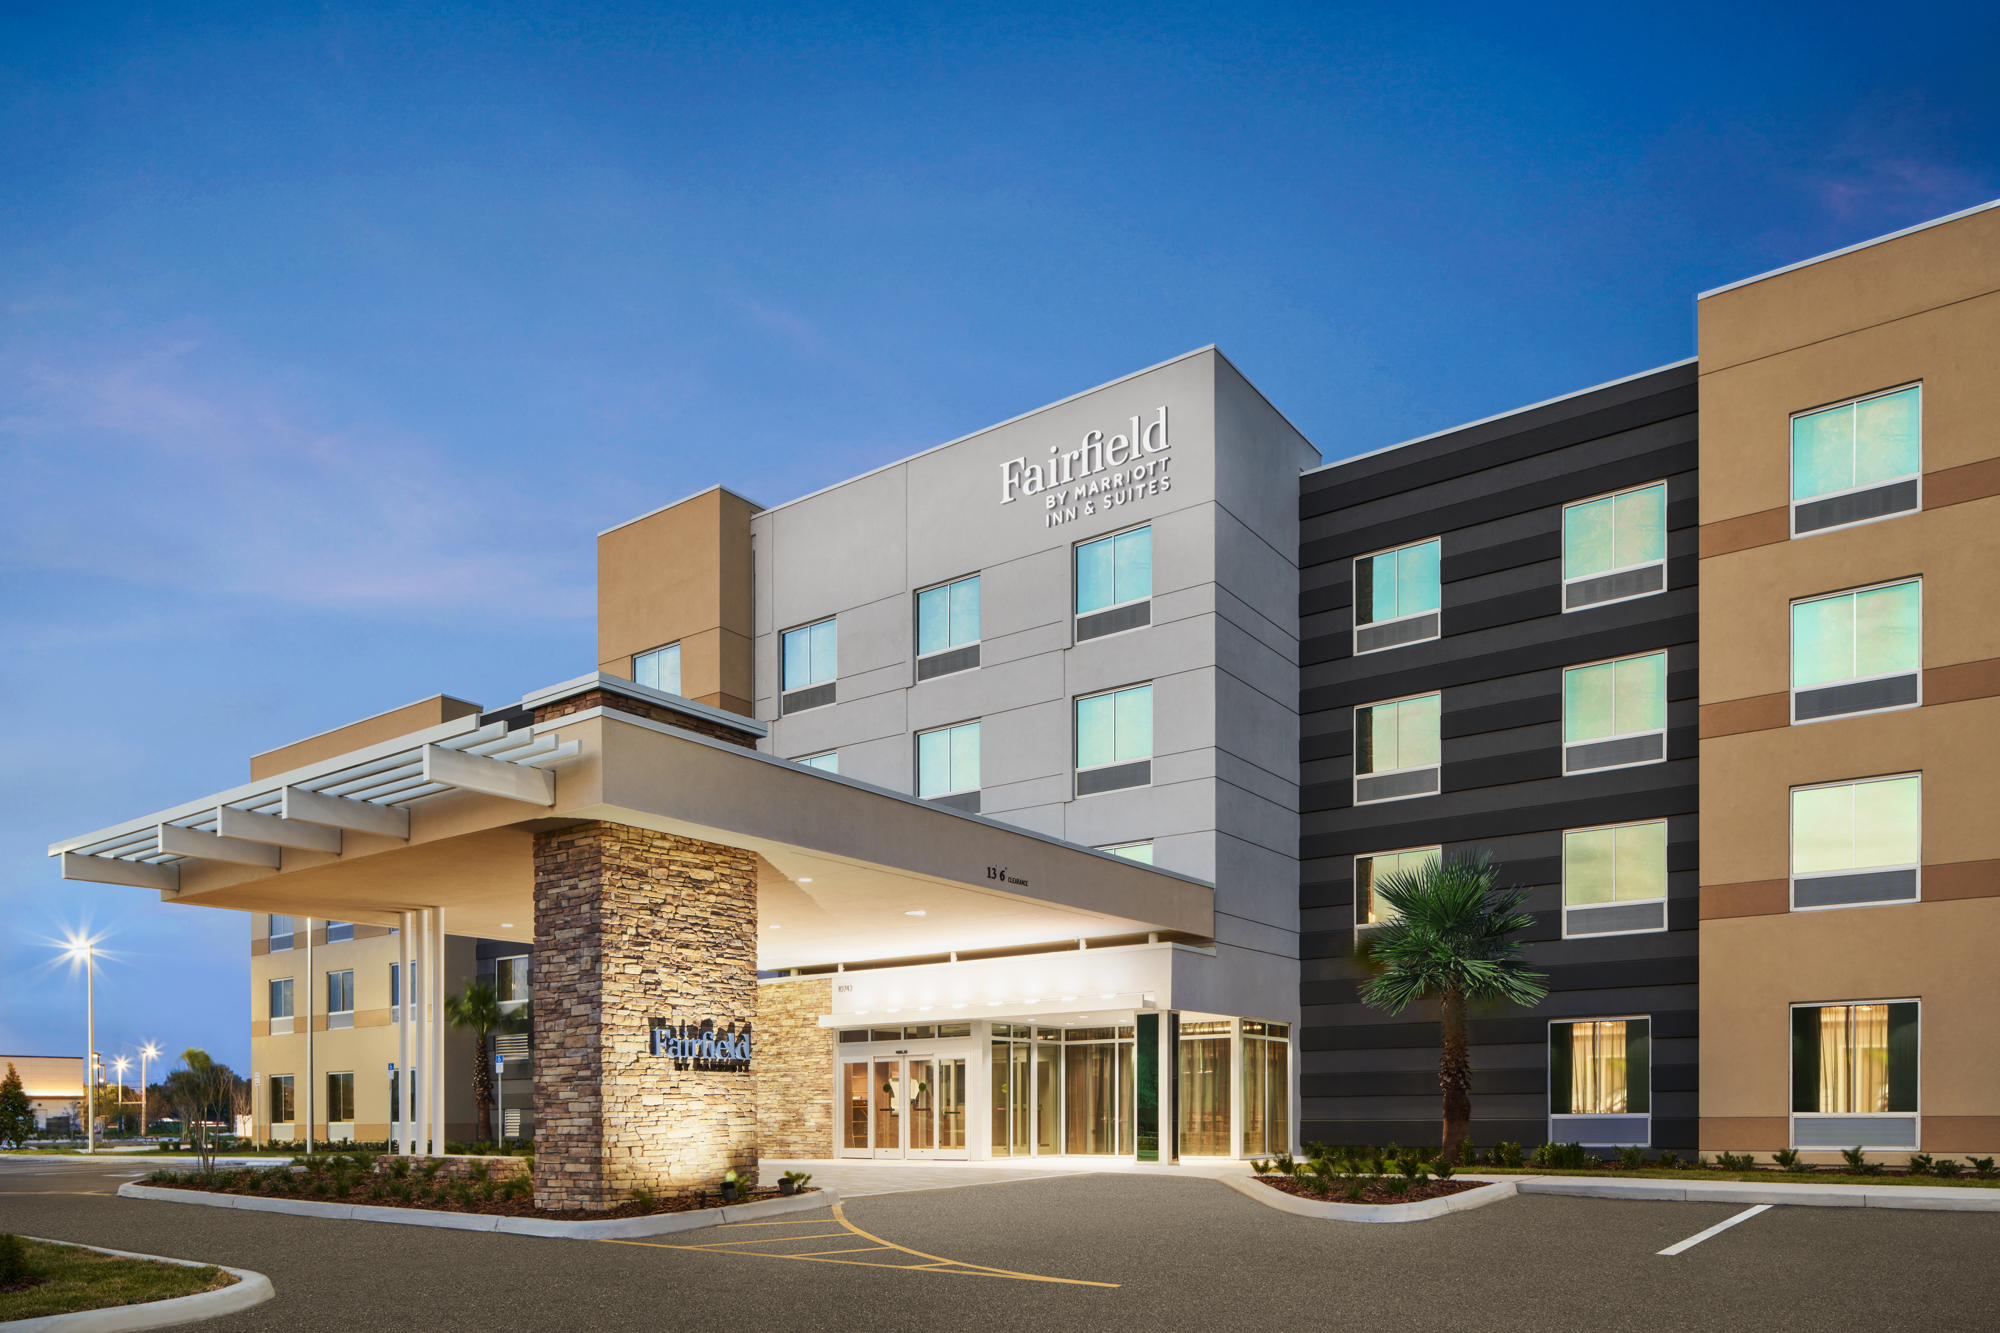 COURTESY PHOTO — Naples Hotel Group manages 18 hospitality properties throughout the state, including the Fairfield Inn & Suites, which opened in Riverview last year.